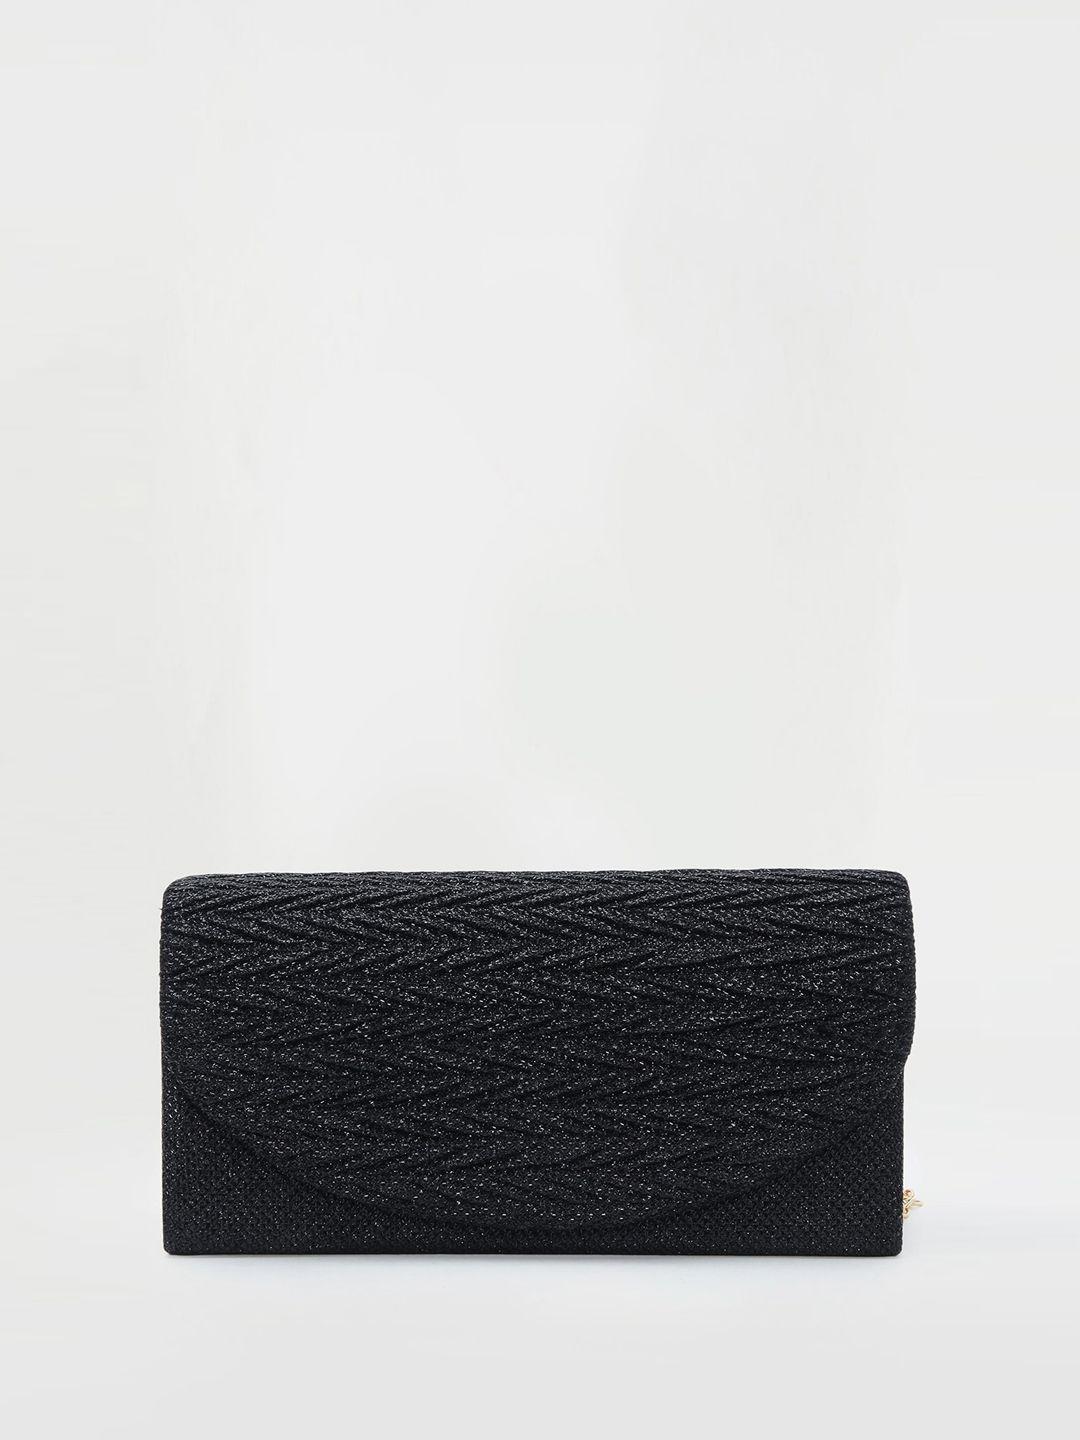 code by lifestyle textured foldover clutch with shoulder chain strap